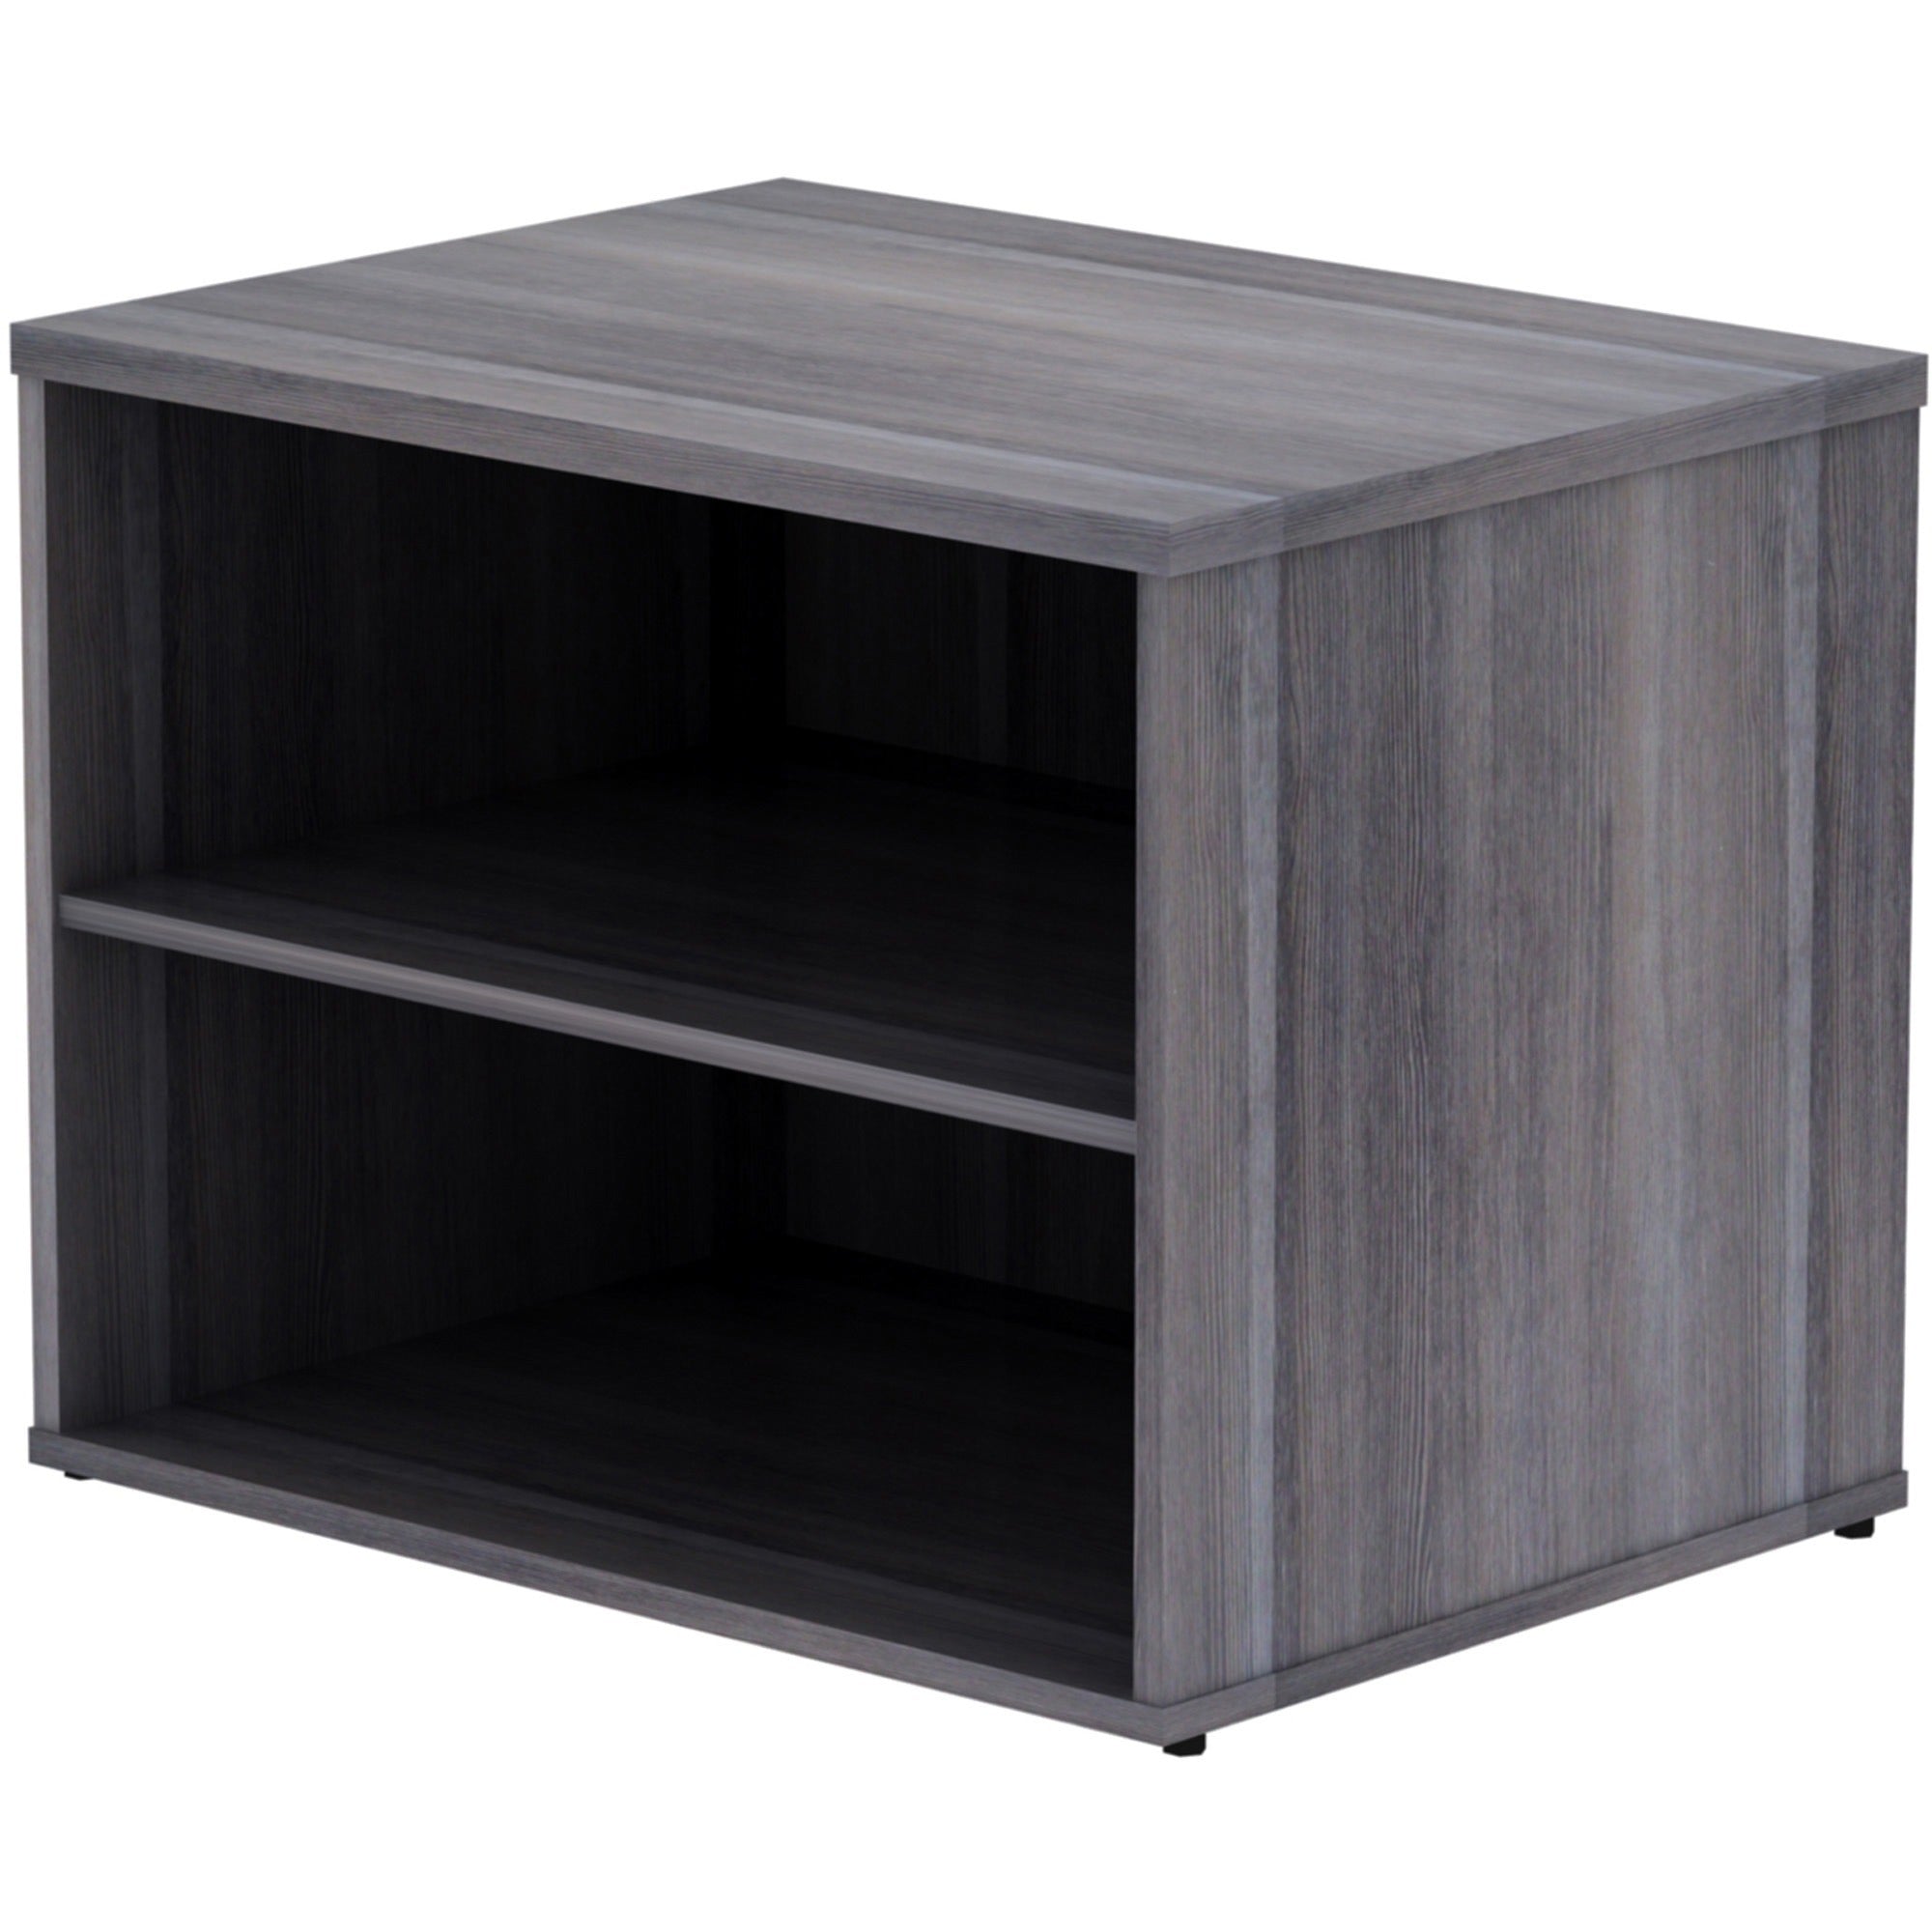 lorell-relevance-series-storage-cabinet-credenza-w-no-doors-295-x-22231-2-shelves-finish-weathered-charcoal-laminate_llr16215 - 3